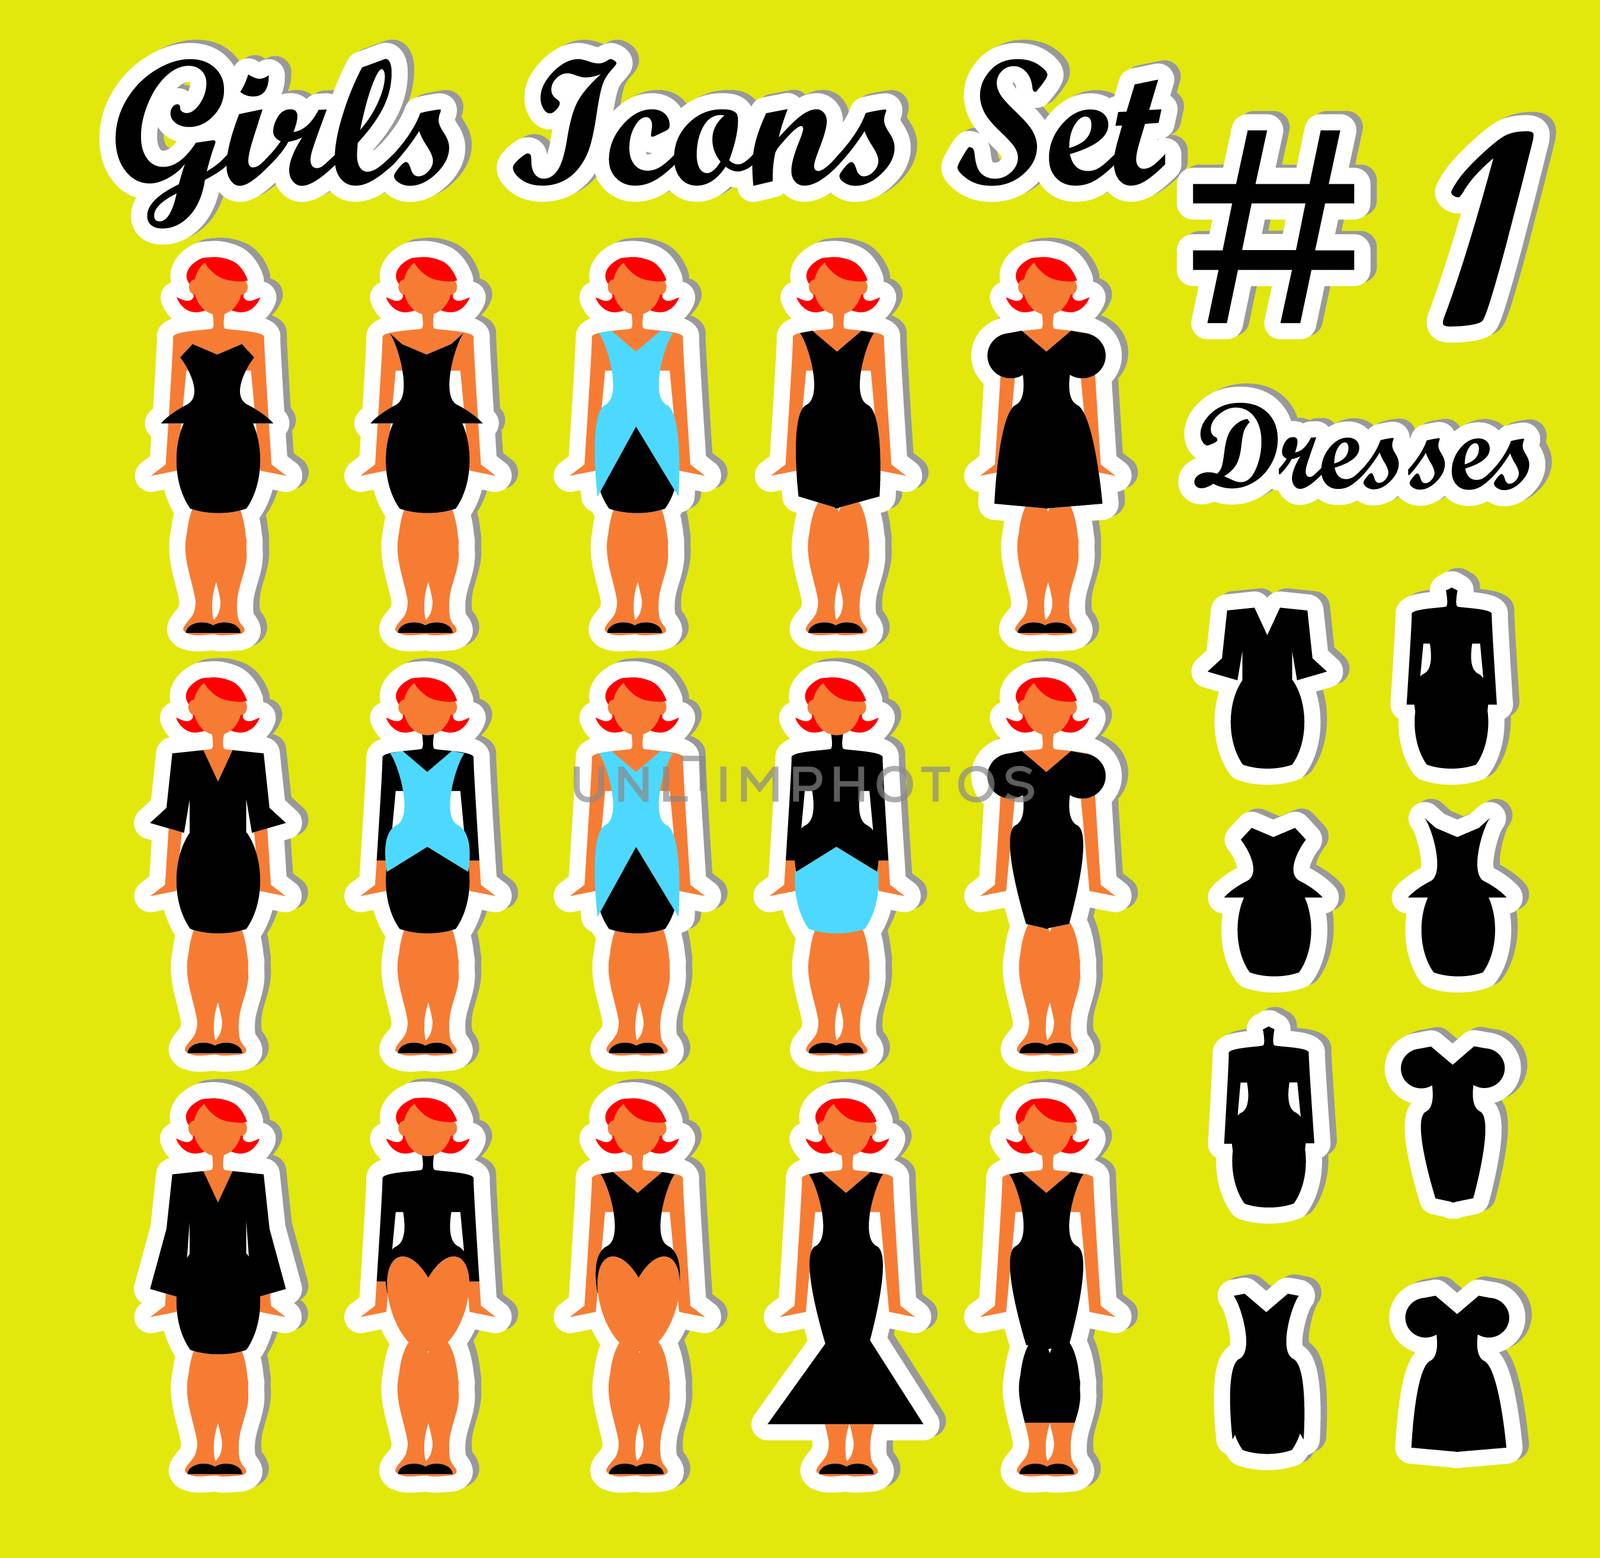 Girls Woman Icons Set 1 dress and people by IconsJewelry